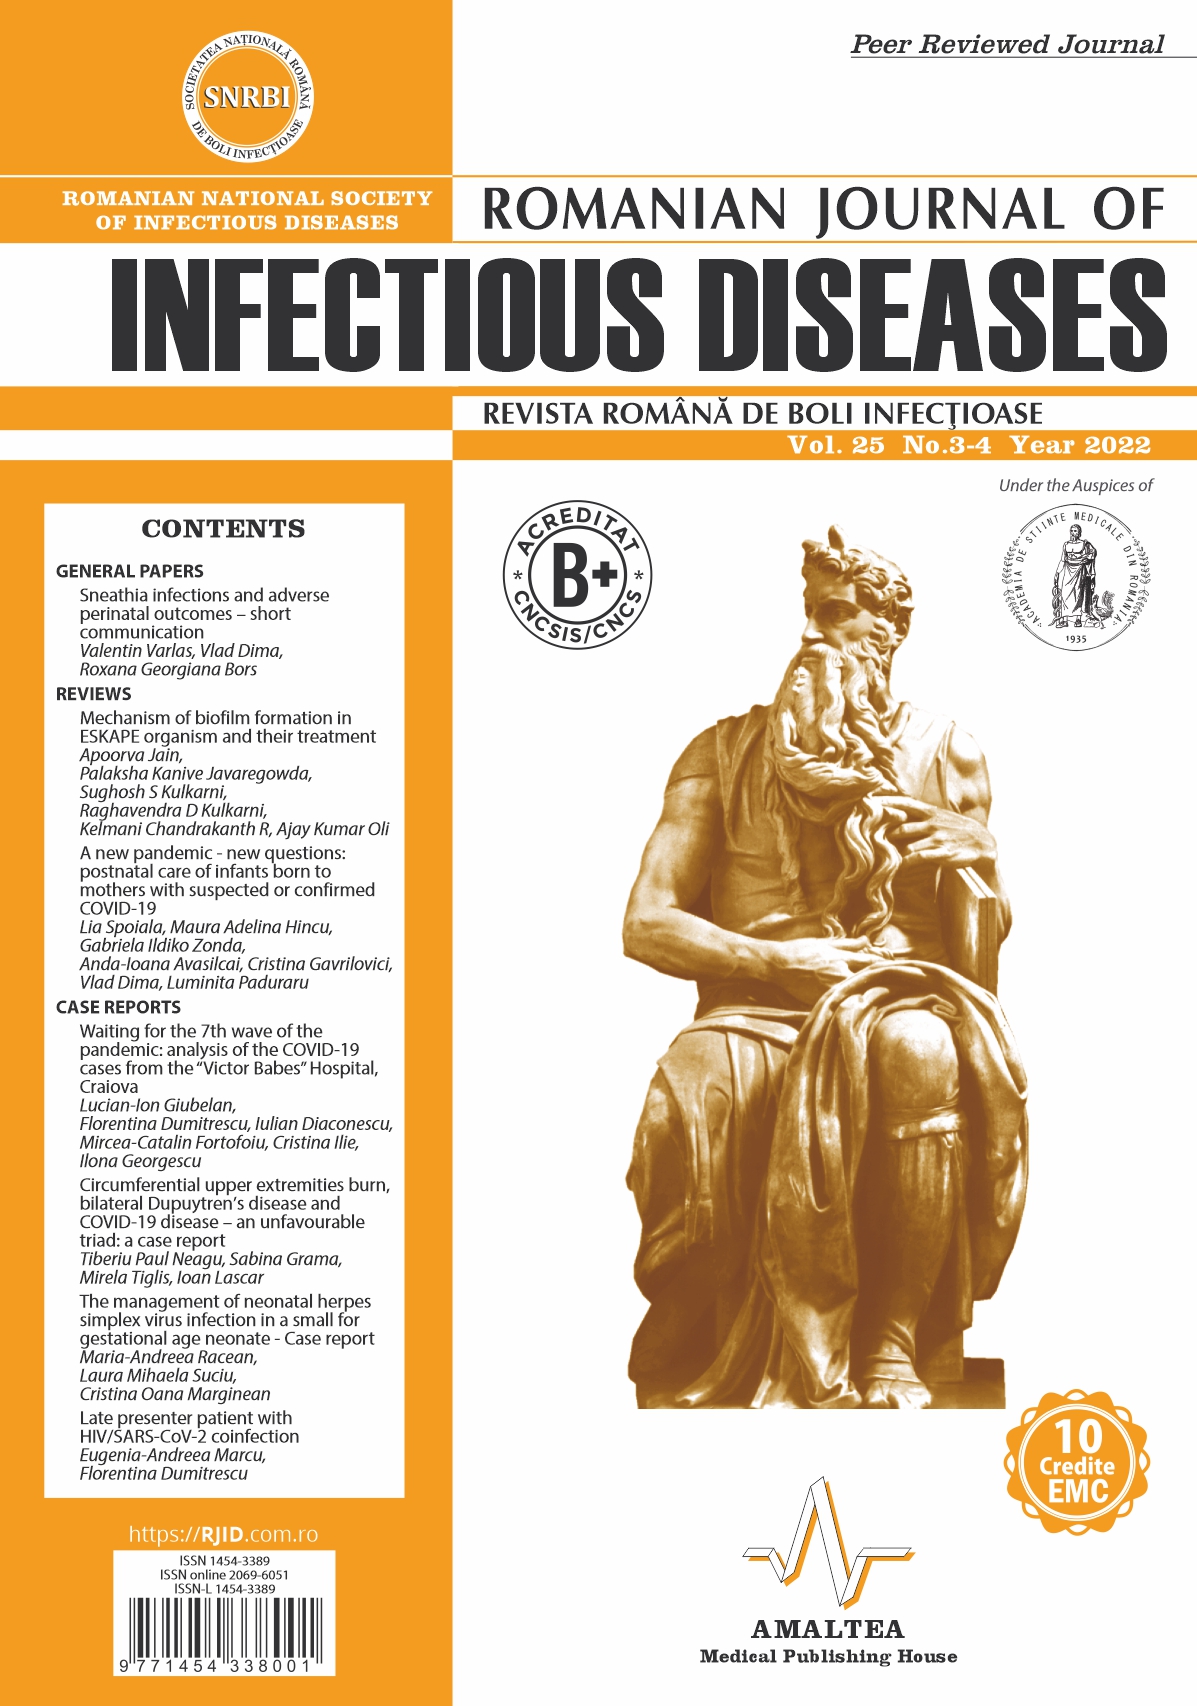 Romanian Journal of Infectious Diseases - Vol. 25, No. 3-4, 2022